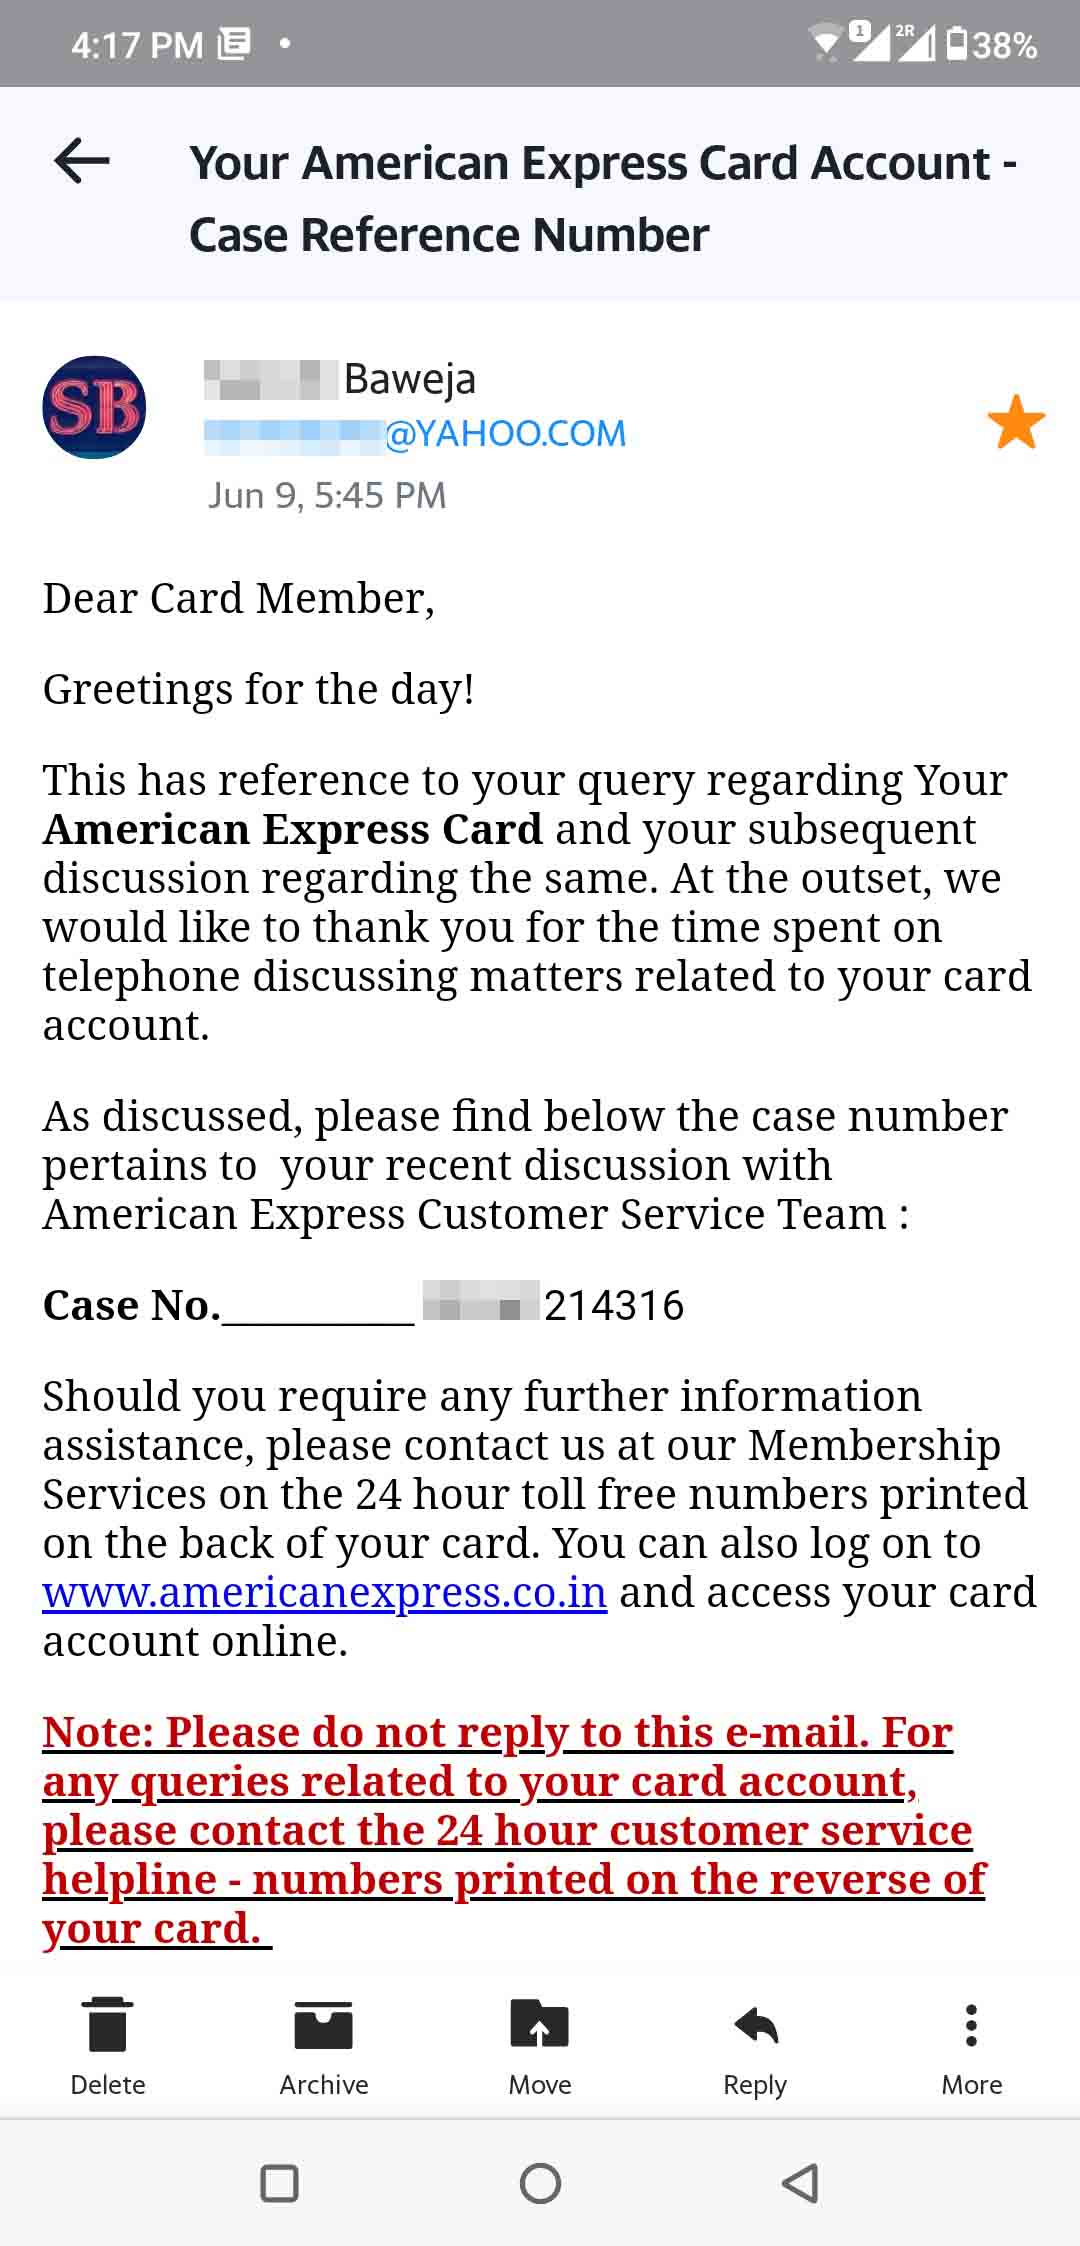 The AMEX Experience | What Makes American Express Exceptional